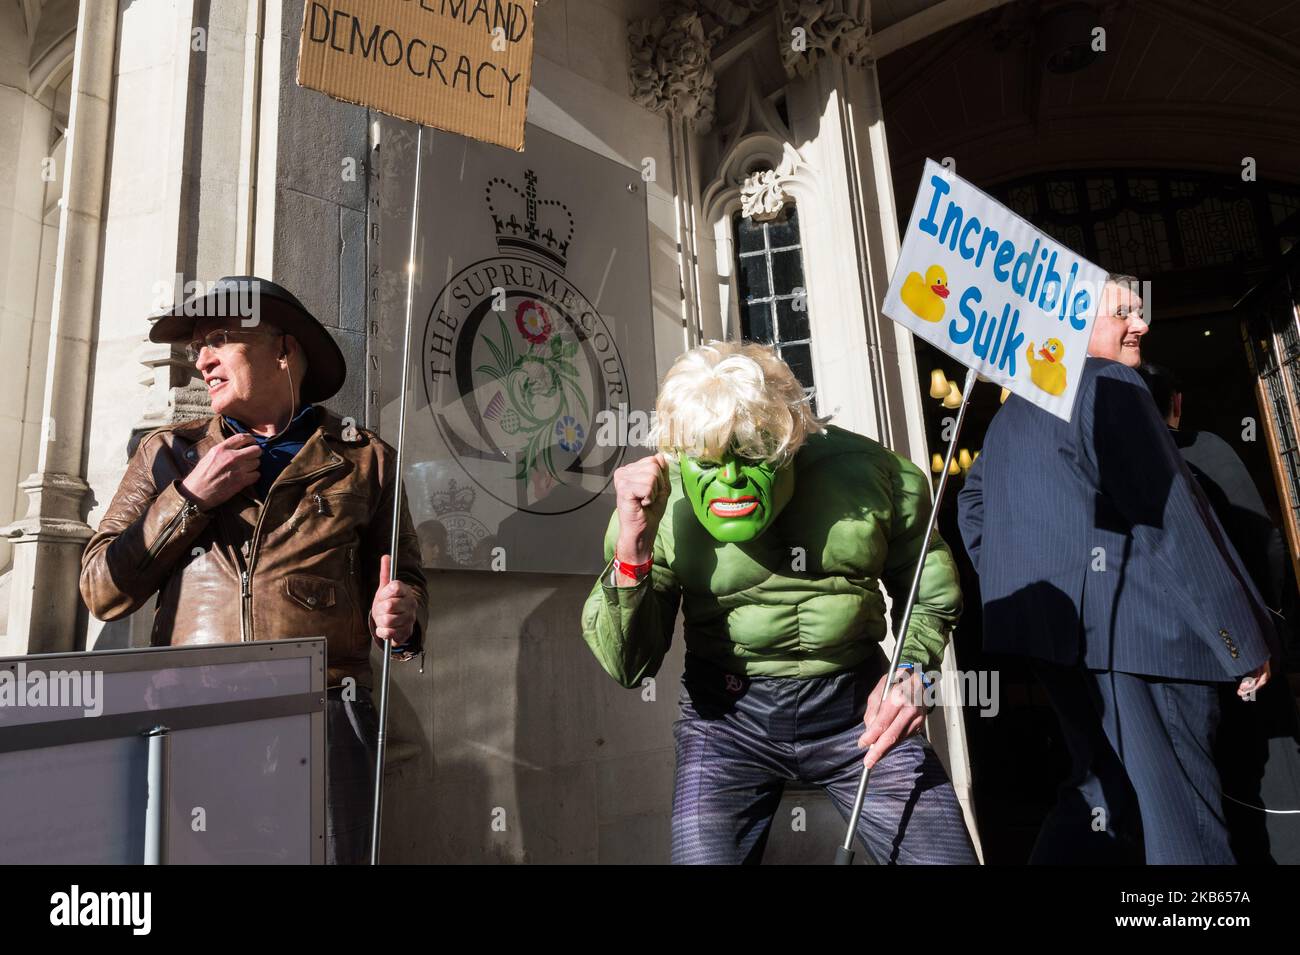 A protester dressed as the comic-book character the Incredible Hulk takes part in a demonstration outside the Supreme Court against Boris Johnson's suspension of parliament on 17 September, 2019 in London, England. Today, the Supreme Court judges begin a three-day hearing over the claim that Prime Minister Boris Johnson acted unlawfully in advising the Queen to prorogue parliament for five weeks in order to prevent MPs from debating the Brexit crisis. (Photo by WIktor Szymanowicz/NurPhoto) Stock Photo